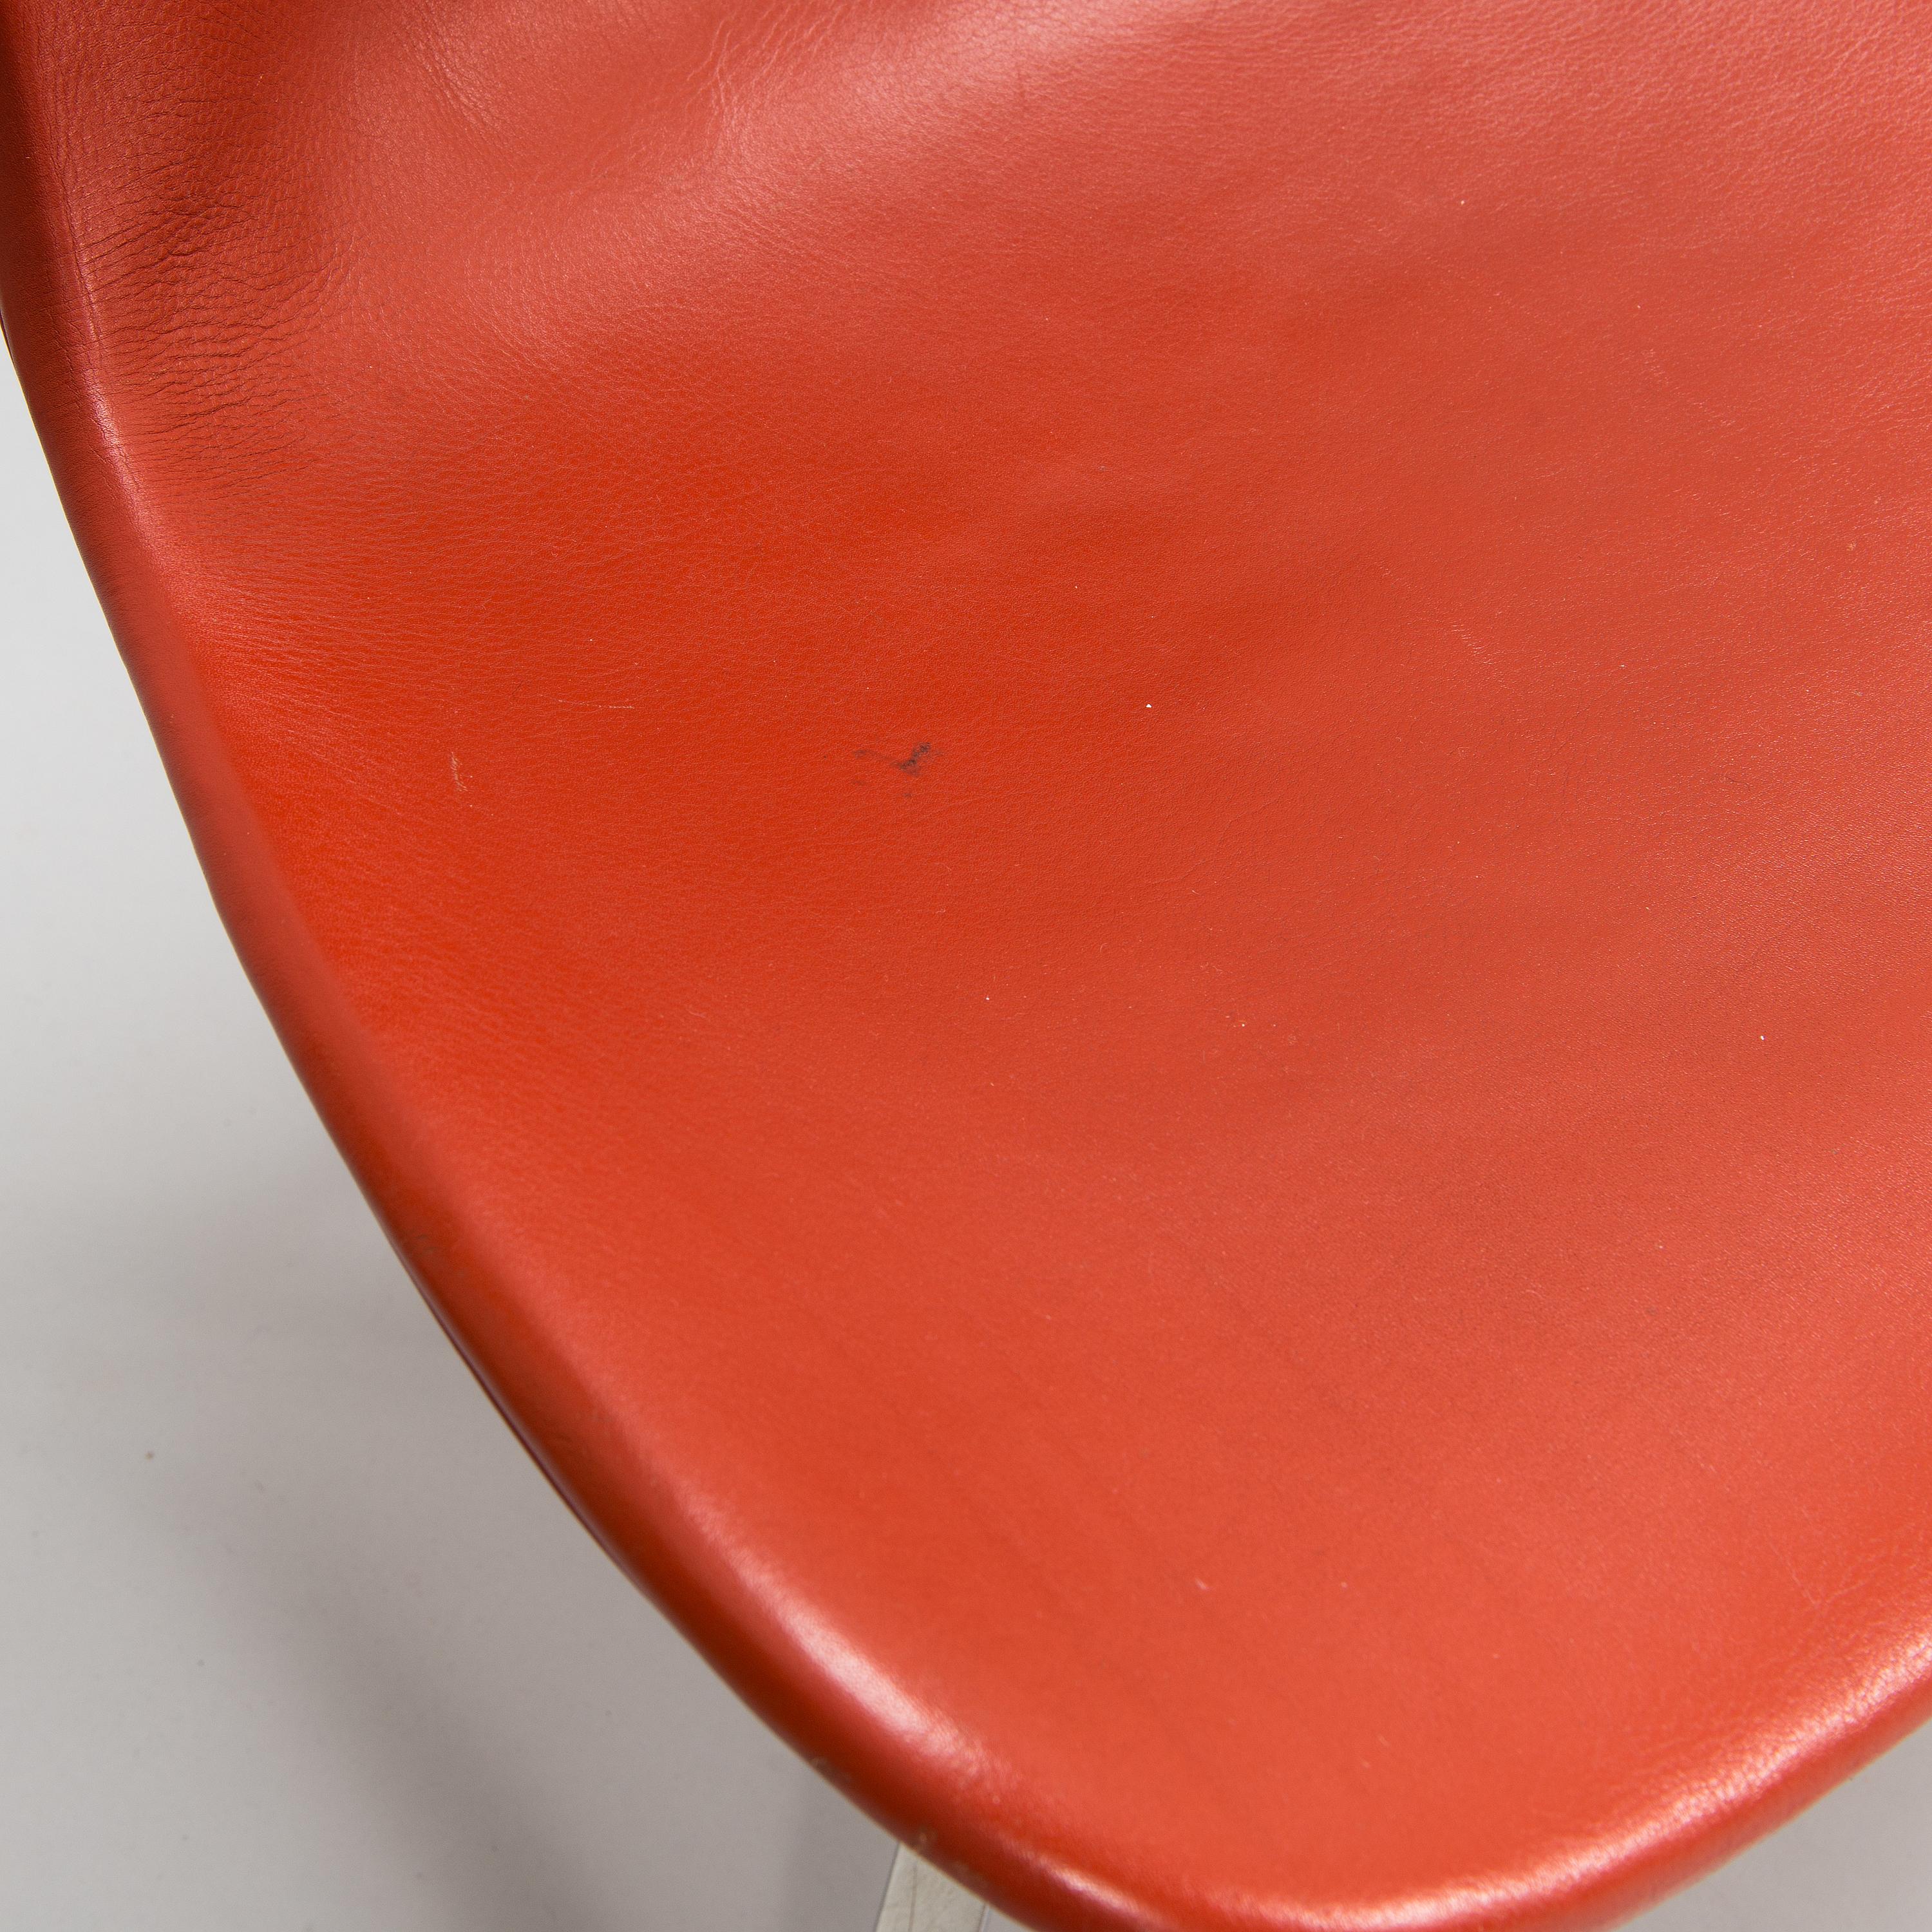 Stainless Steel Poul Kjaerholm PK9 Chairs, Vintage Red Leather Upholstered, Set of 6 For Sale